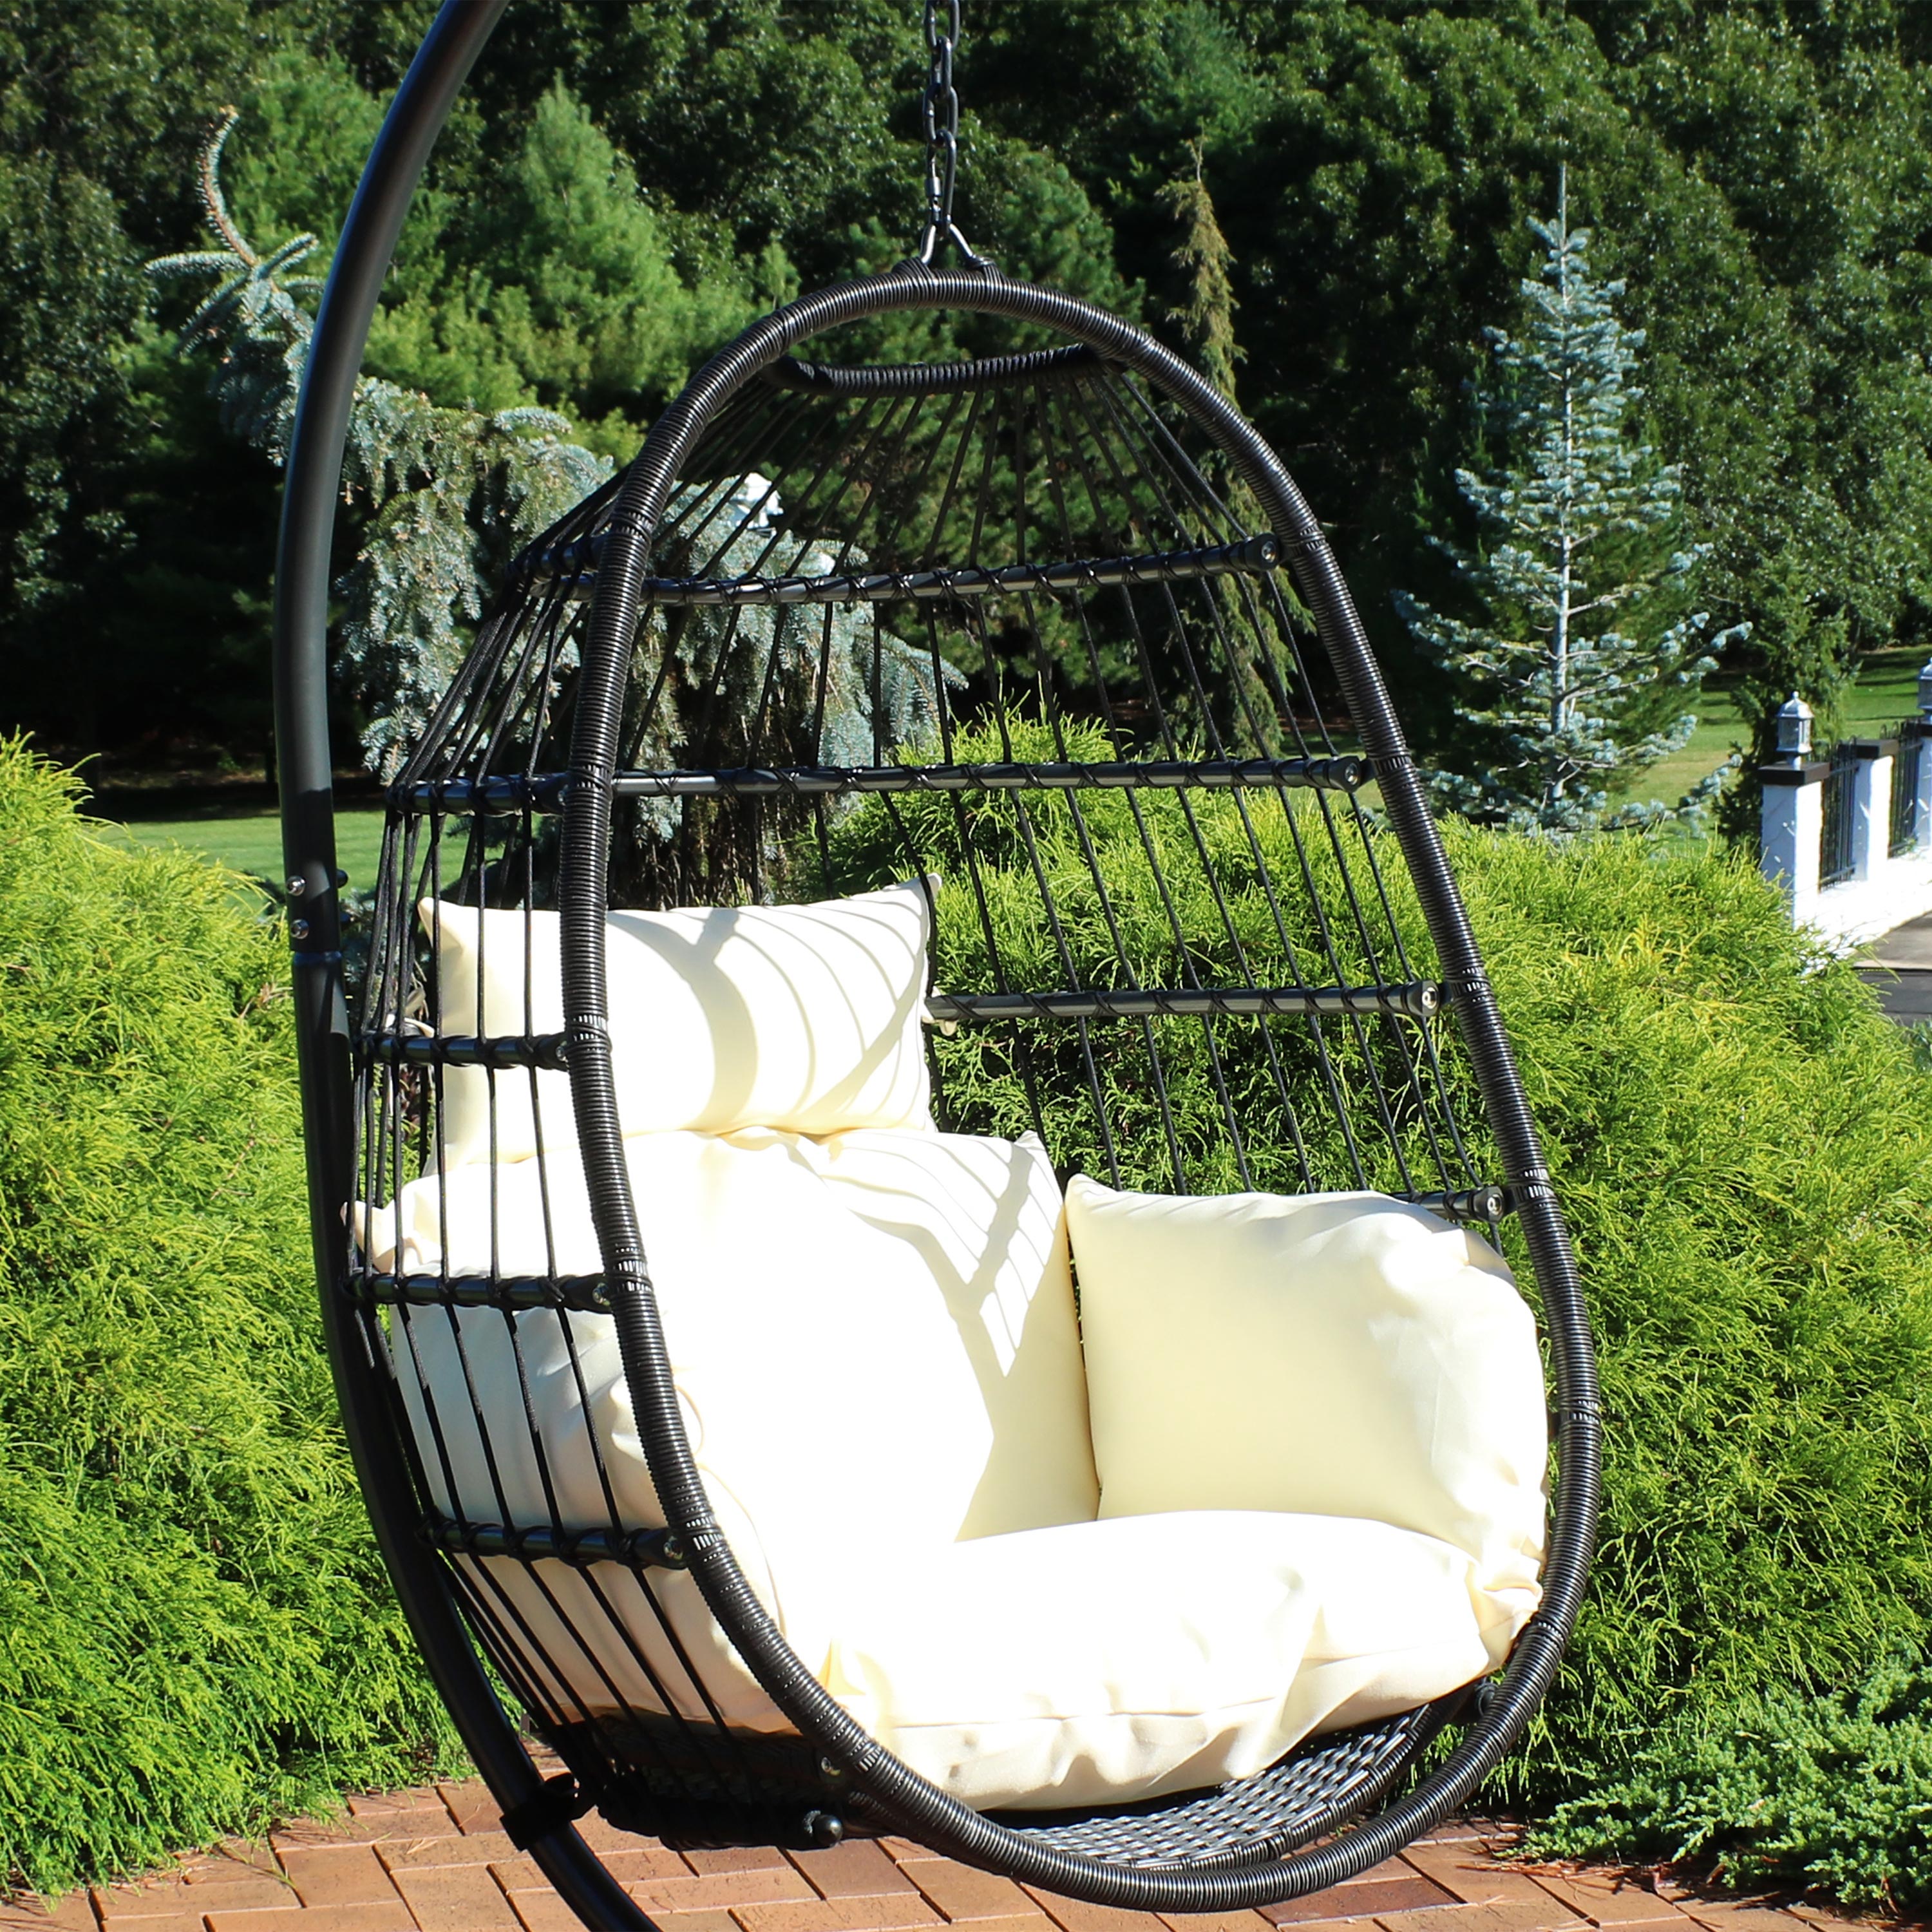 Sunnydaze Penelope Outdoor Hanging Egg Chair with Seat Cushions - Cream - image 2 of 9